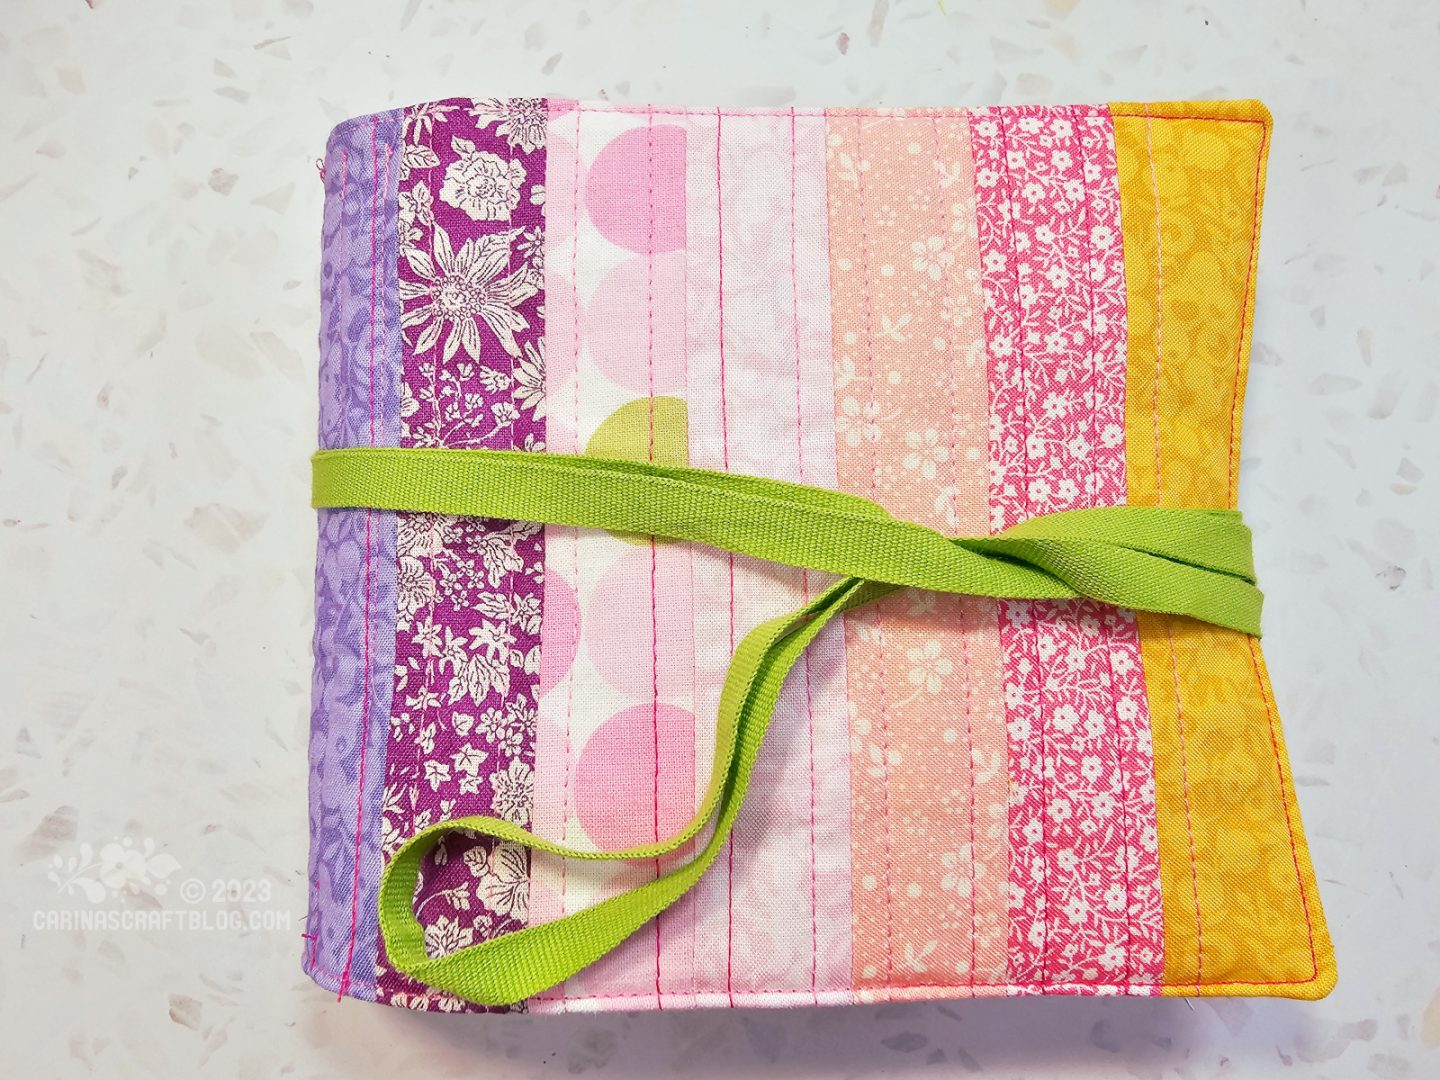 Over head view of a textile book. The cover of the book is made of vertical strips of fabric in purple, pink and yellow colours. A narrow  lime green ribbon is wrapped around the book.